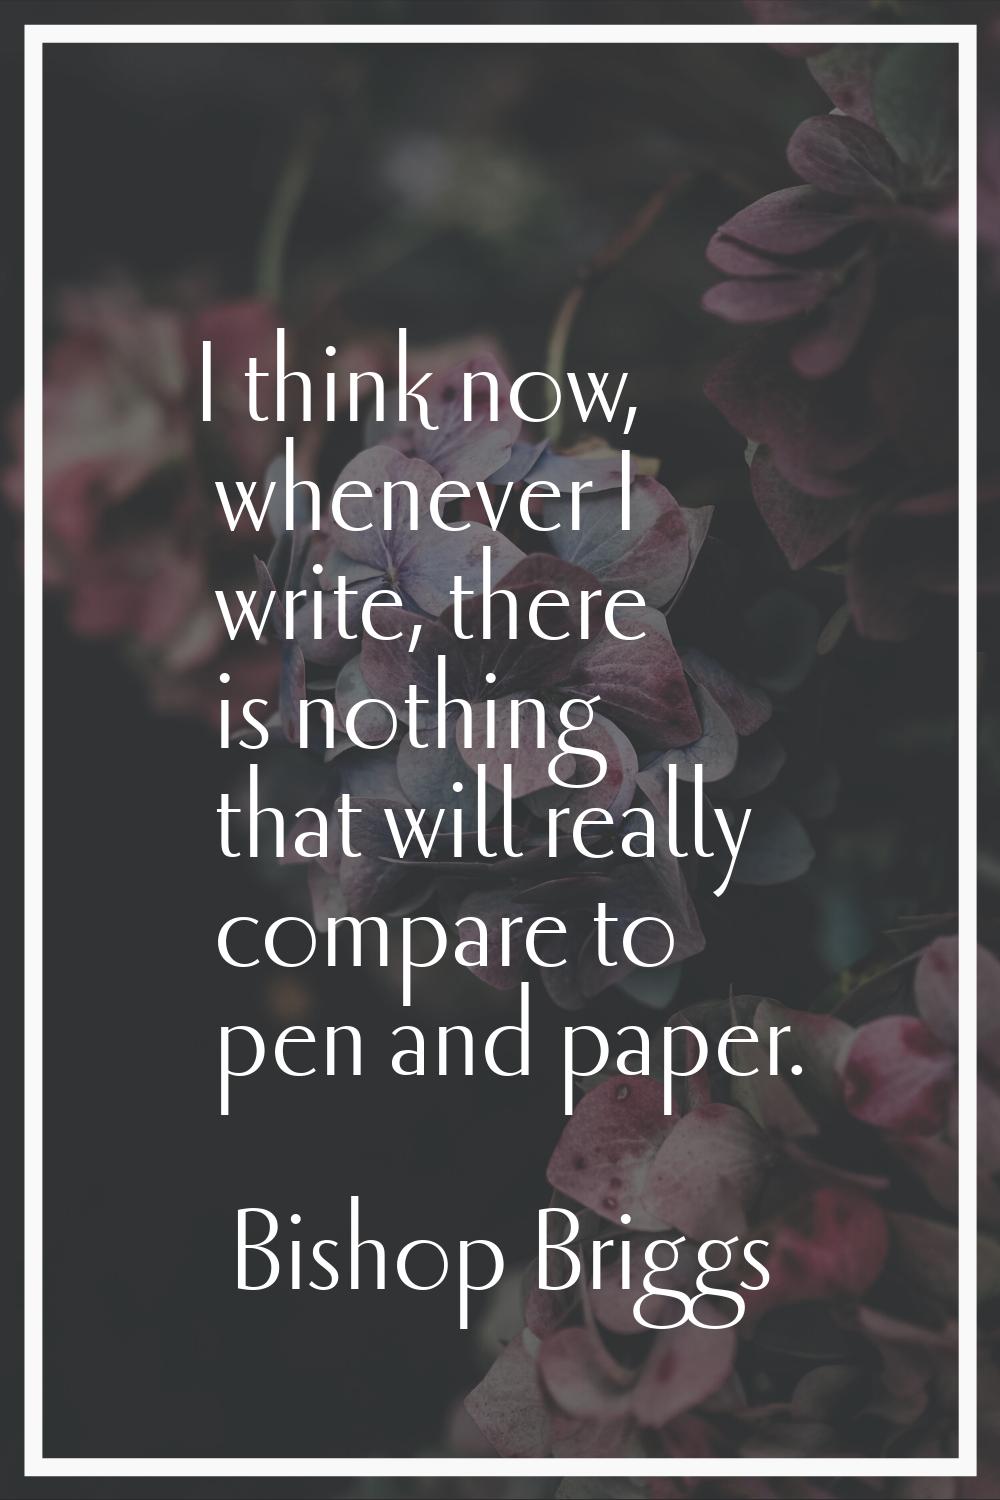 I think now, whenever I write, there is nothing that will really compare to pen and paper.